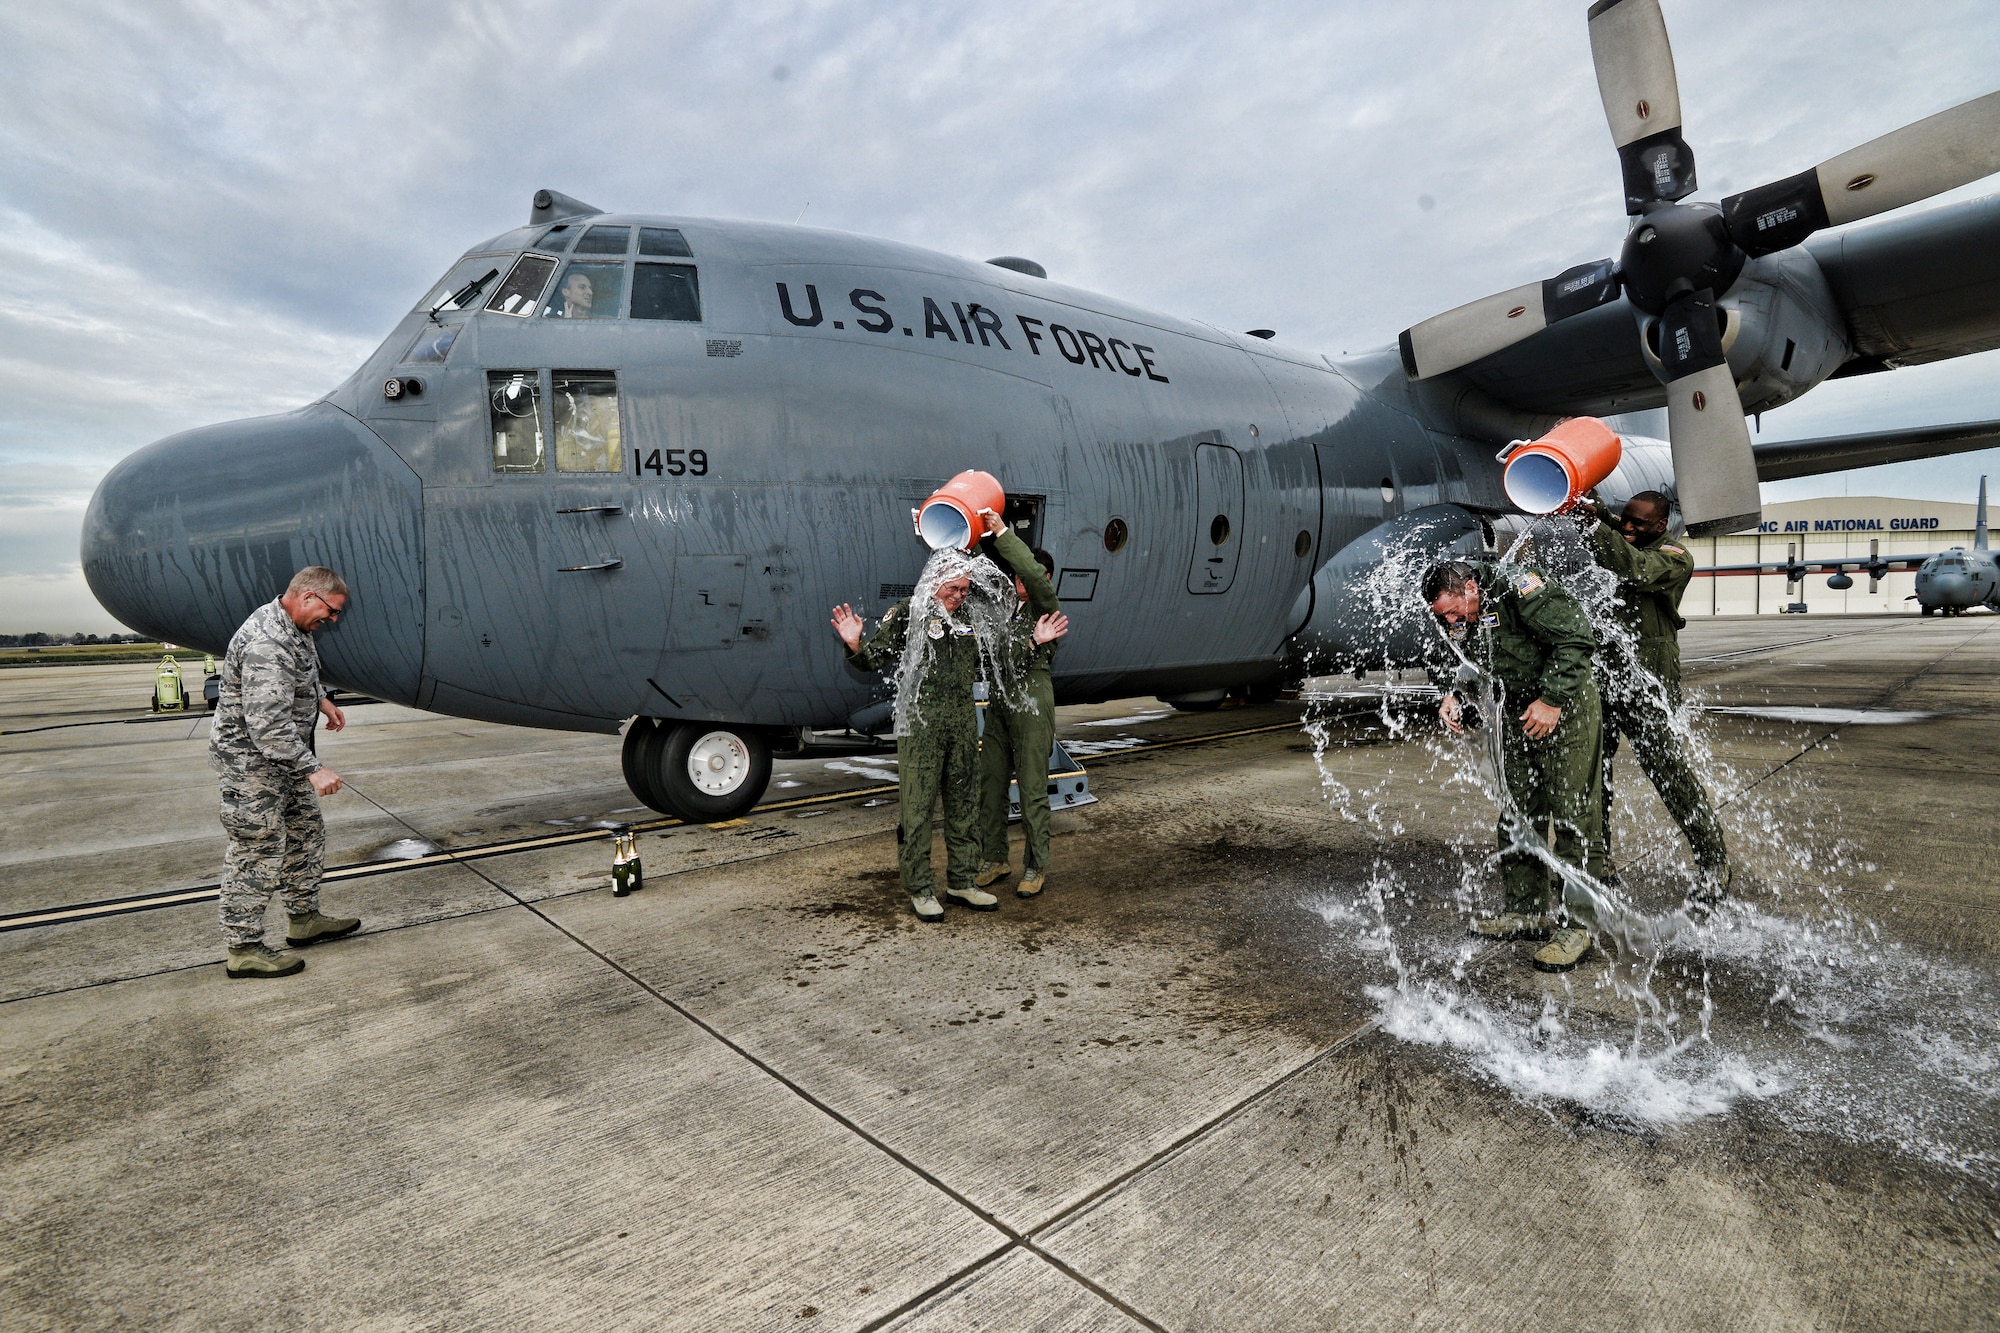 In a longstanding military tradition, U.S. Air Force Master Sgt. Pennie Brawley (left) douses Vice Wing commander, Col. Quincy “Newt” Huneycutt, III, with ice cold water as Senior Master Sgt. Jermaine Parker (right), does the same to Chief Master Sgt. Andrew “Andy” Huneycutt after the brothers exit the 145th Airlift Wing, C-130 Hercules aircraft for the last time at the North Carolina Air National Guard Base, Charlotte Douglas International Airport. Combined, the brothers leave the 145th Airlift Wing with over 72 years of honorable military service. (U.S. Air National Guard photo by Staff Sgt. Yolanda Addison /Released)